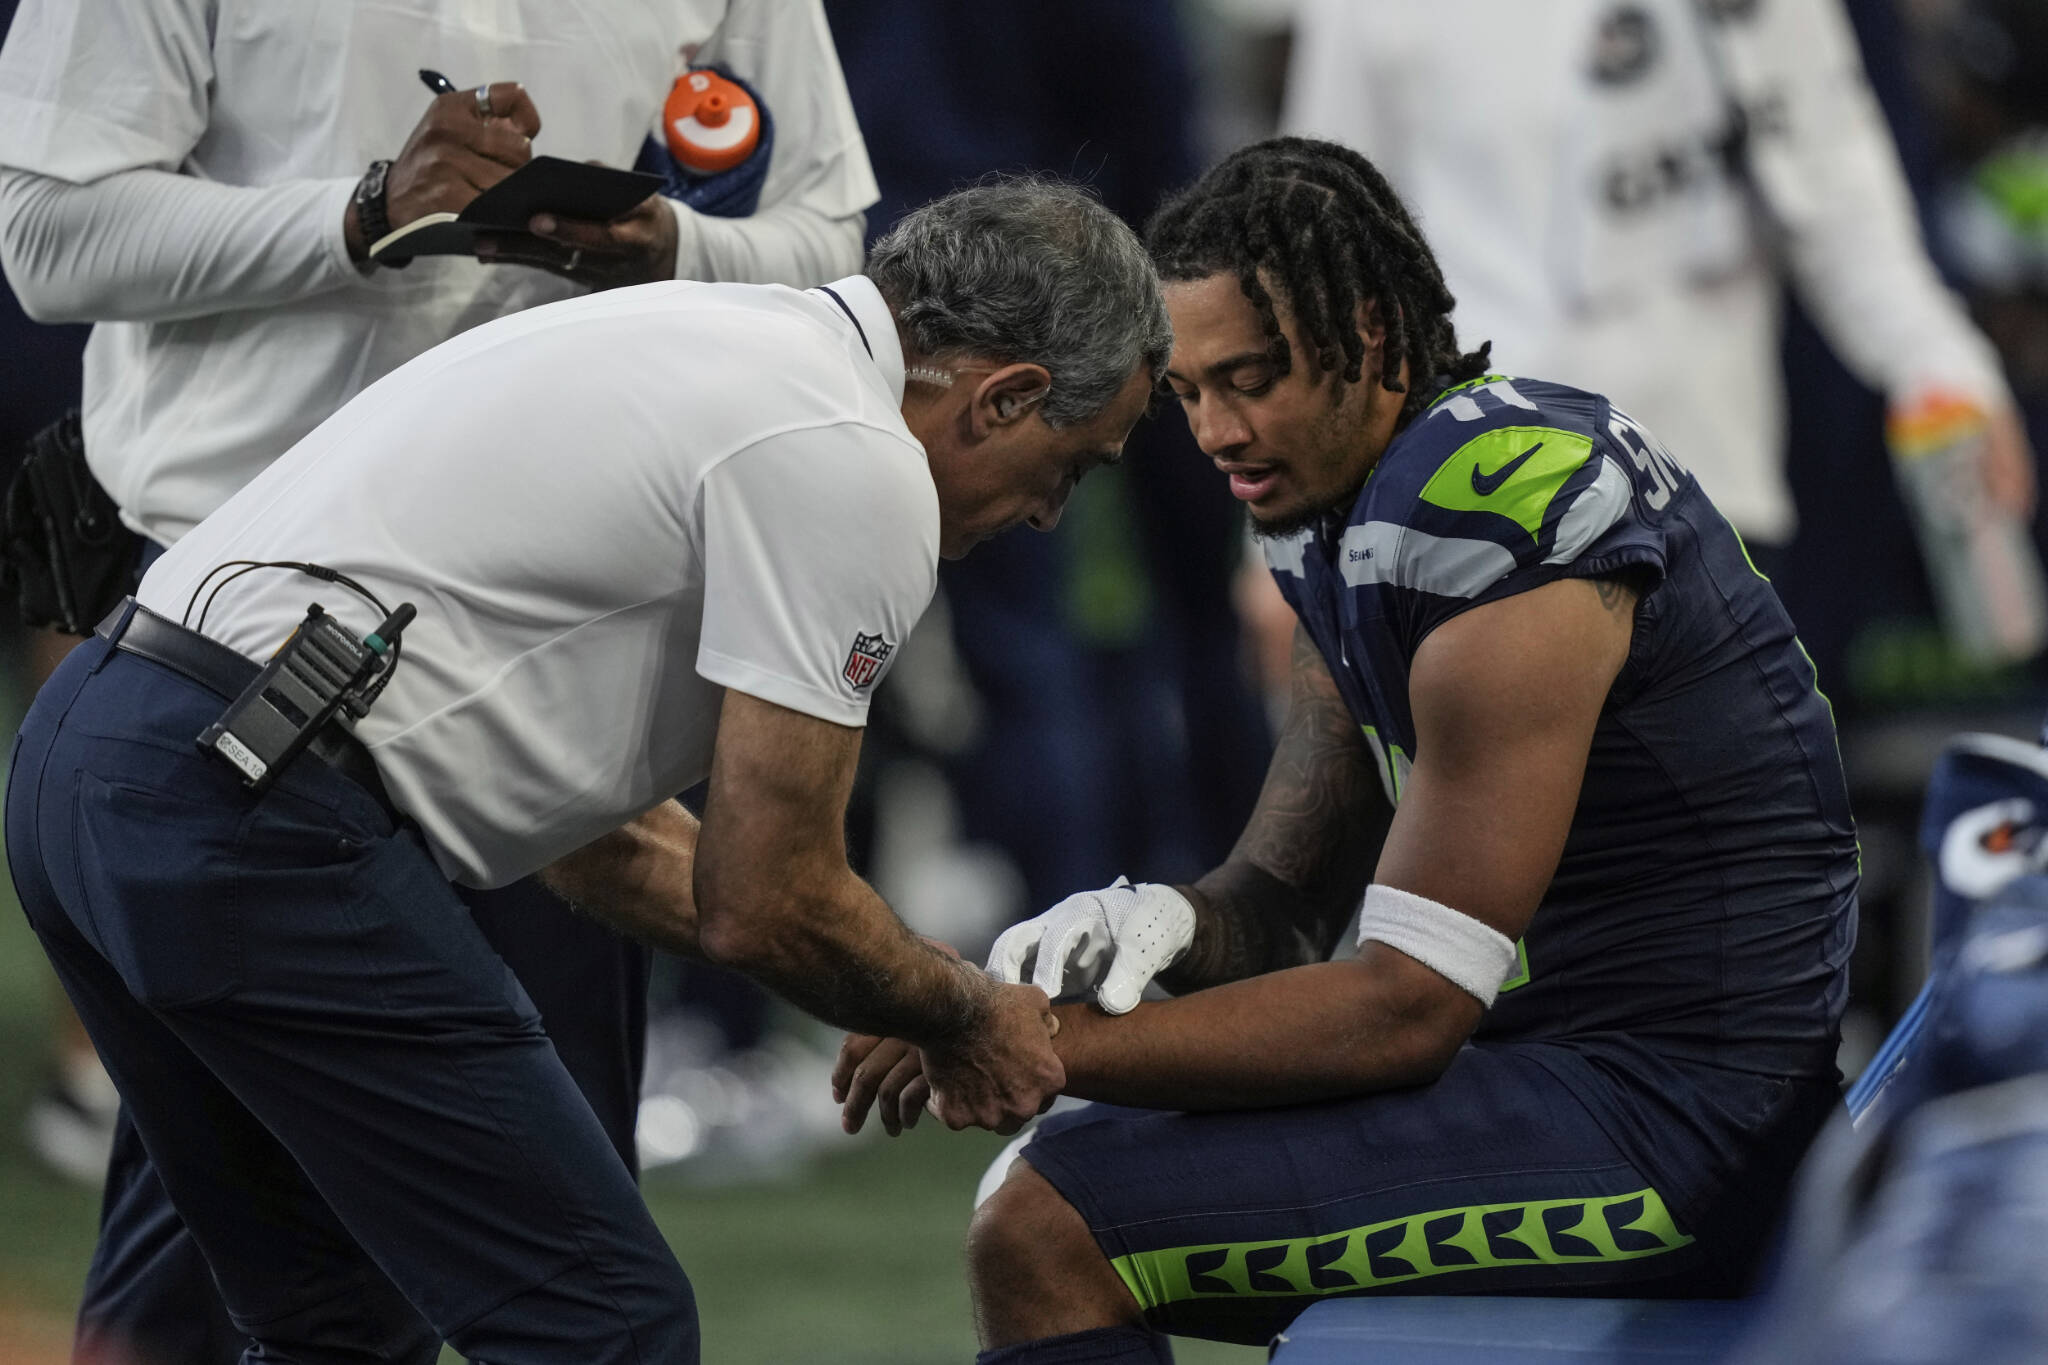 Seattle Seahawks team personnel check out the wrist of wide receiver Jaxon Smith-Njigba during an NFL preseason football game against the Dallas Cowboys, Saturday, Aug. 19, 2023, in Seattle. The Seahawks won 22-14. (AP Photo/Stephen Brashear)